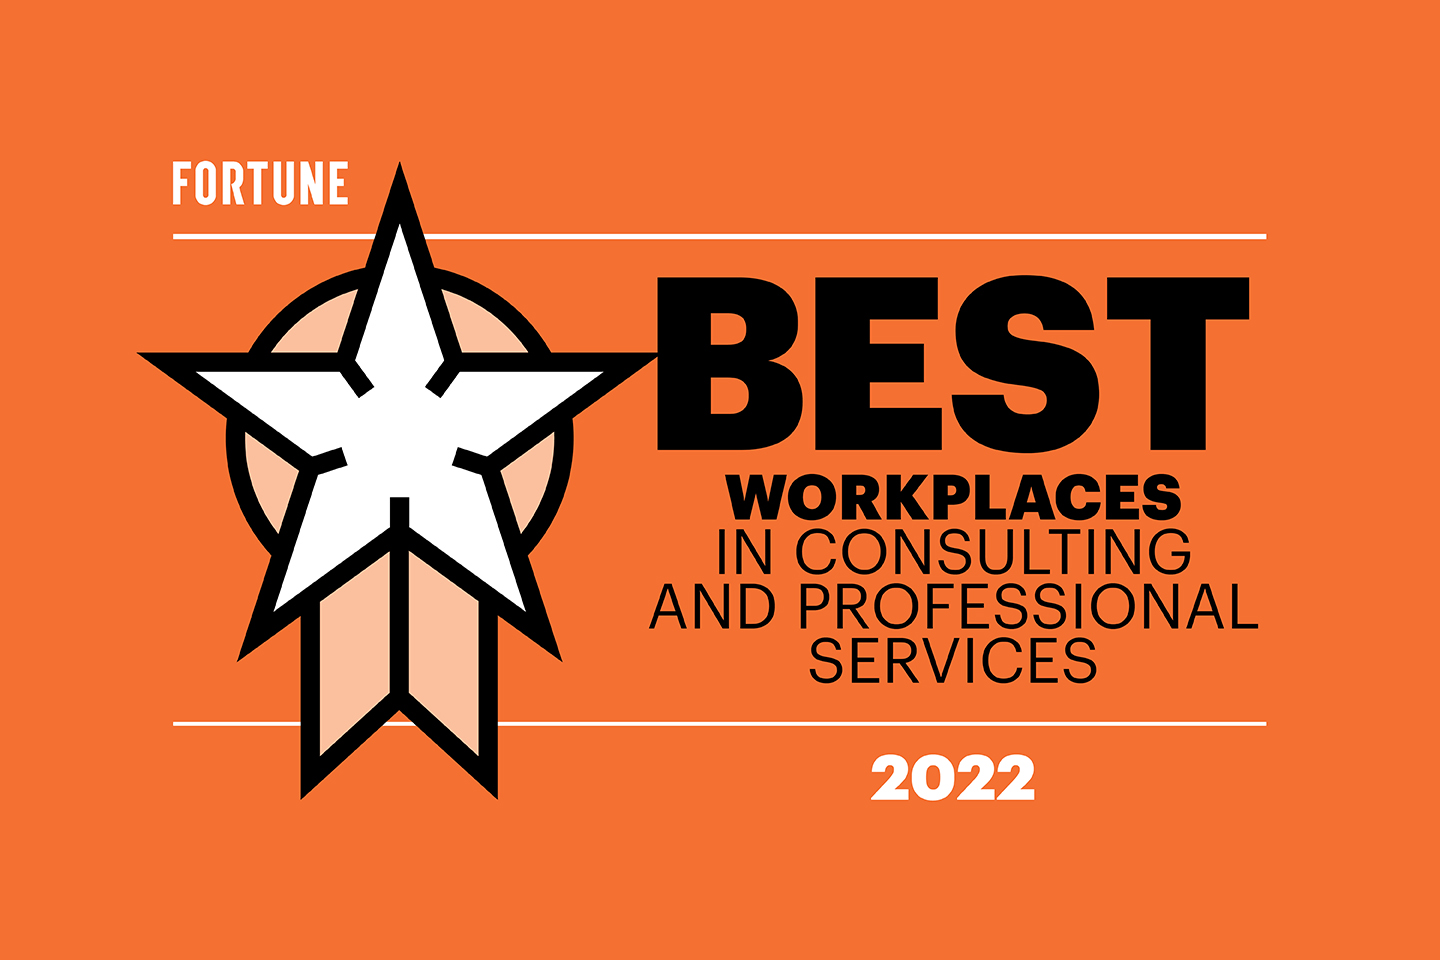 50 Best Small and Medium Workplaces in Consulting and Professional Services